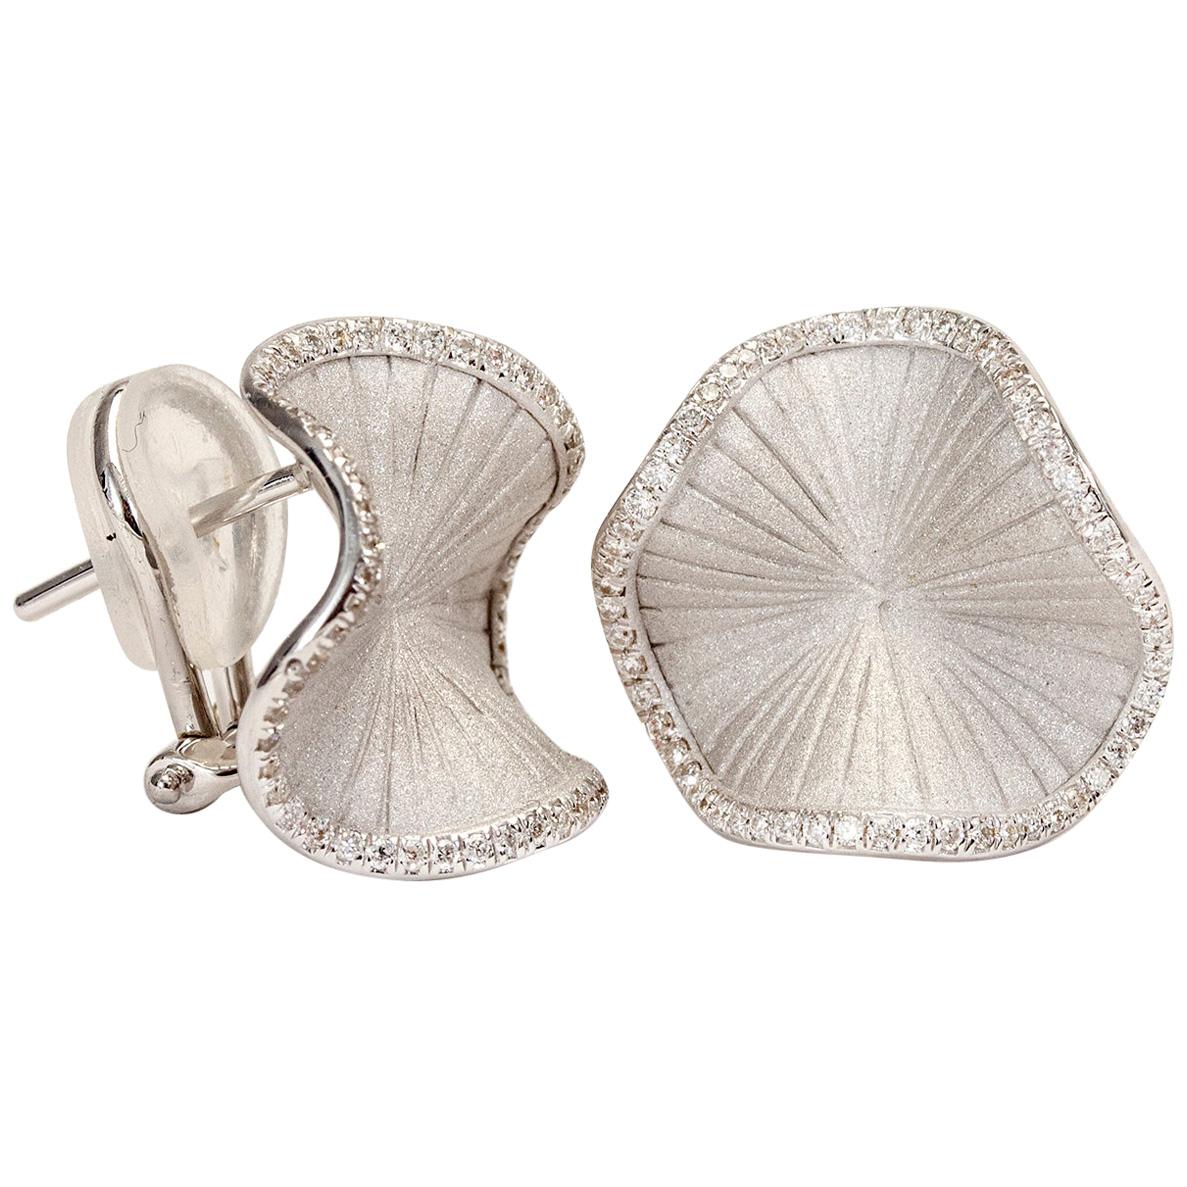 Annamaria Cammilli "Sultana" Stud Earrings with Diamonds in 18 Karat White Gold For Sale